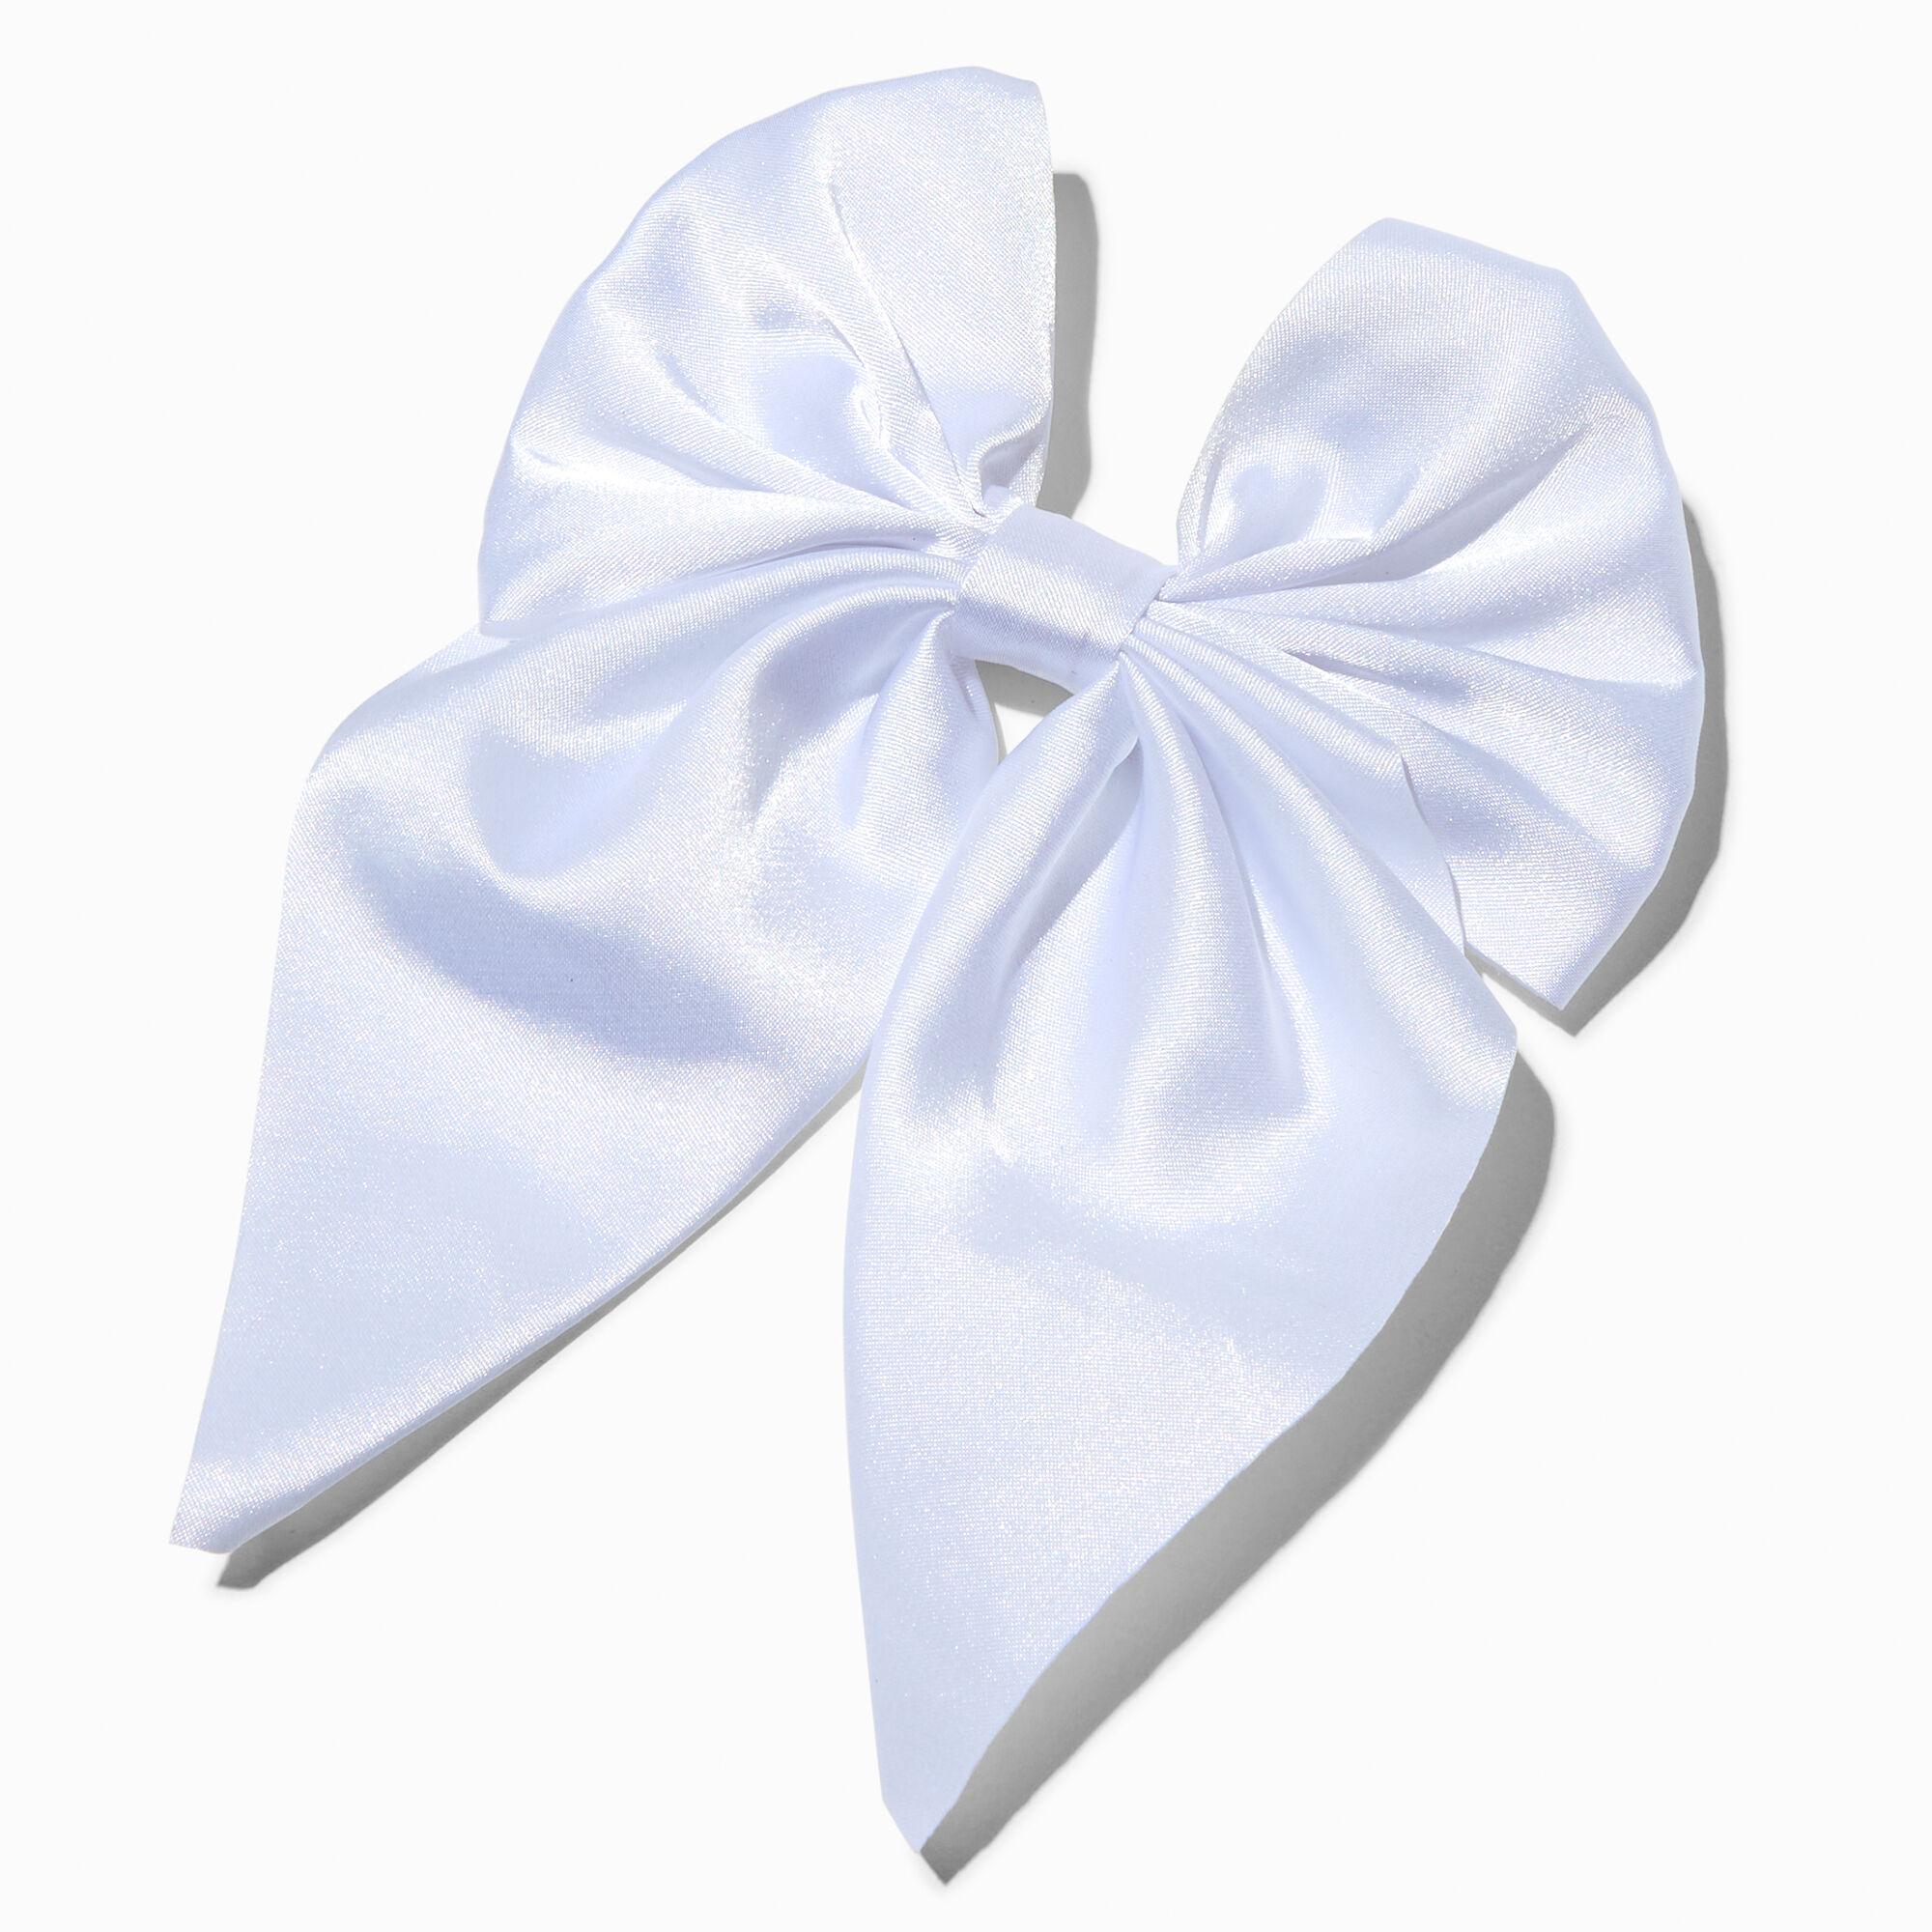 View Claires Club Satin Bow Barrette Hair Clip White information